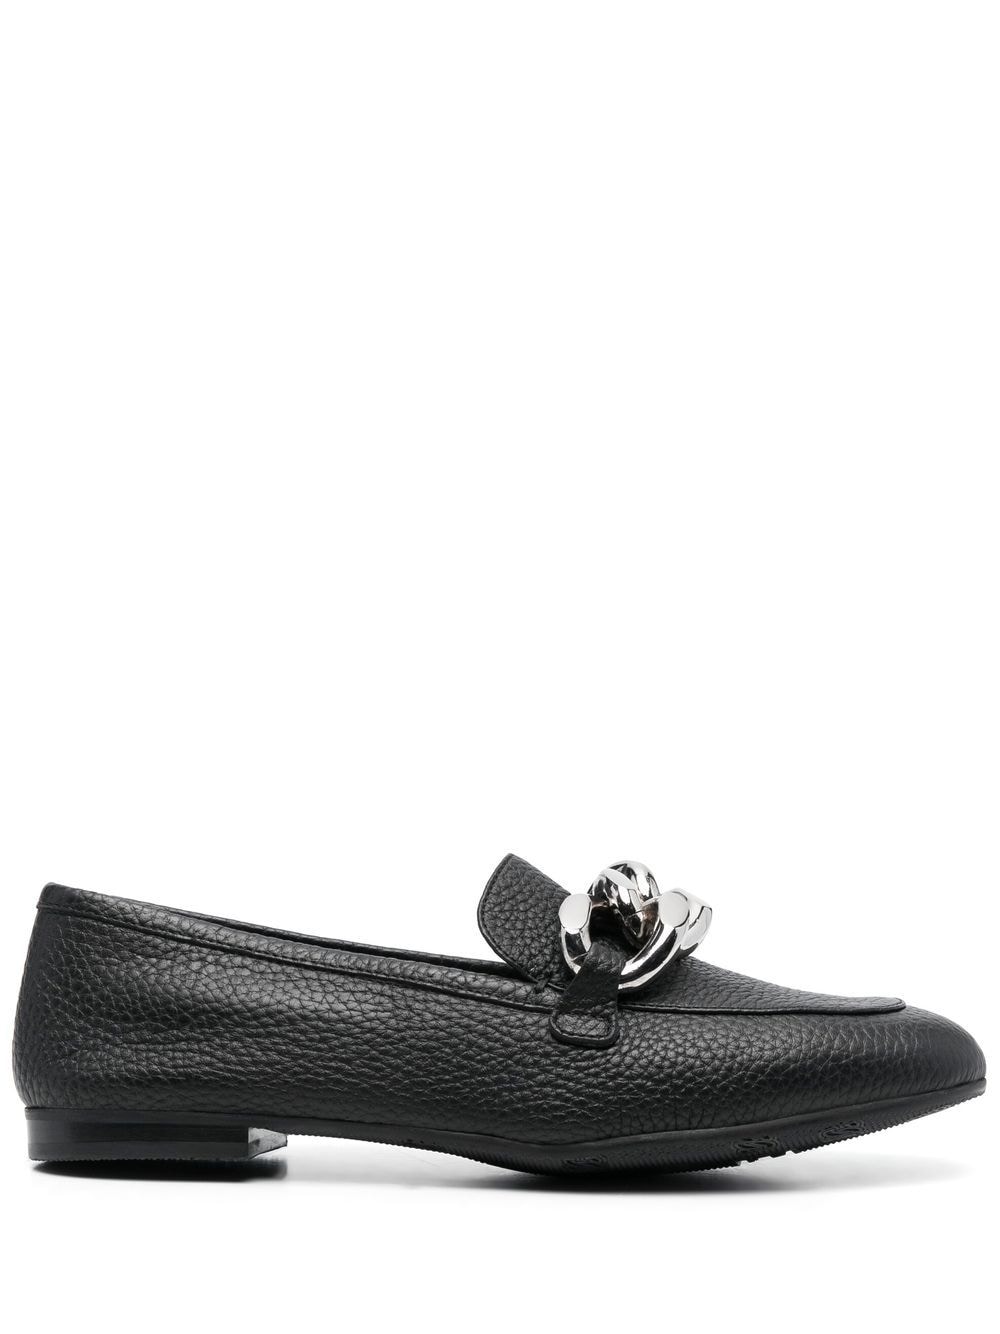 Casadei chunky chain-link leather loafers - Black von Casadei